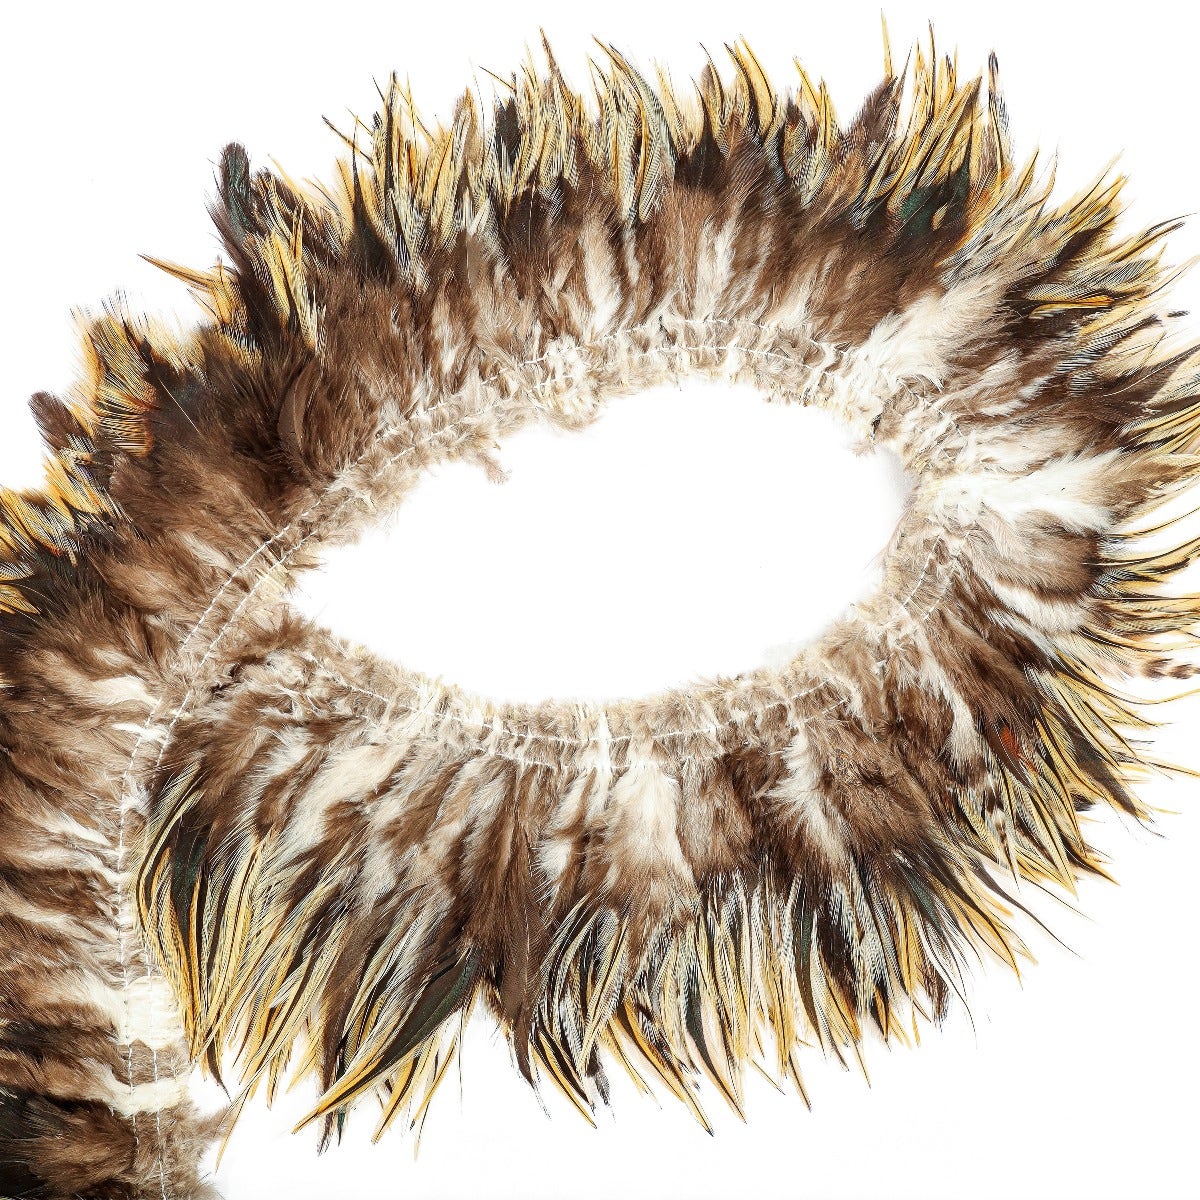 Badger Rooster Saddle Feathers Strung - 1 Yard 4-6" Rooster Feathers - Natural